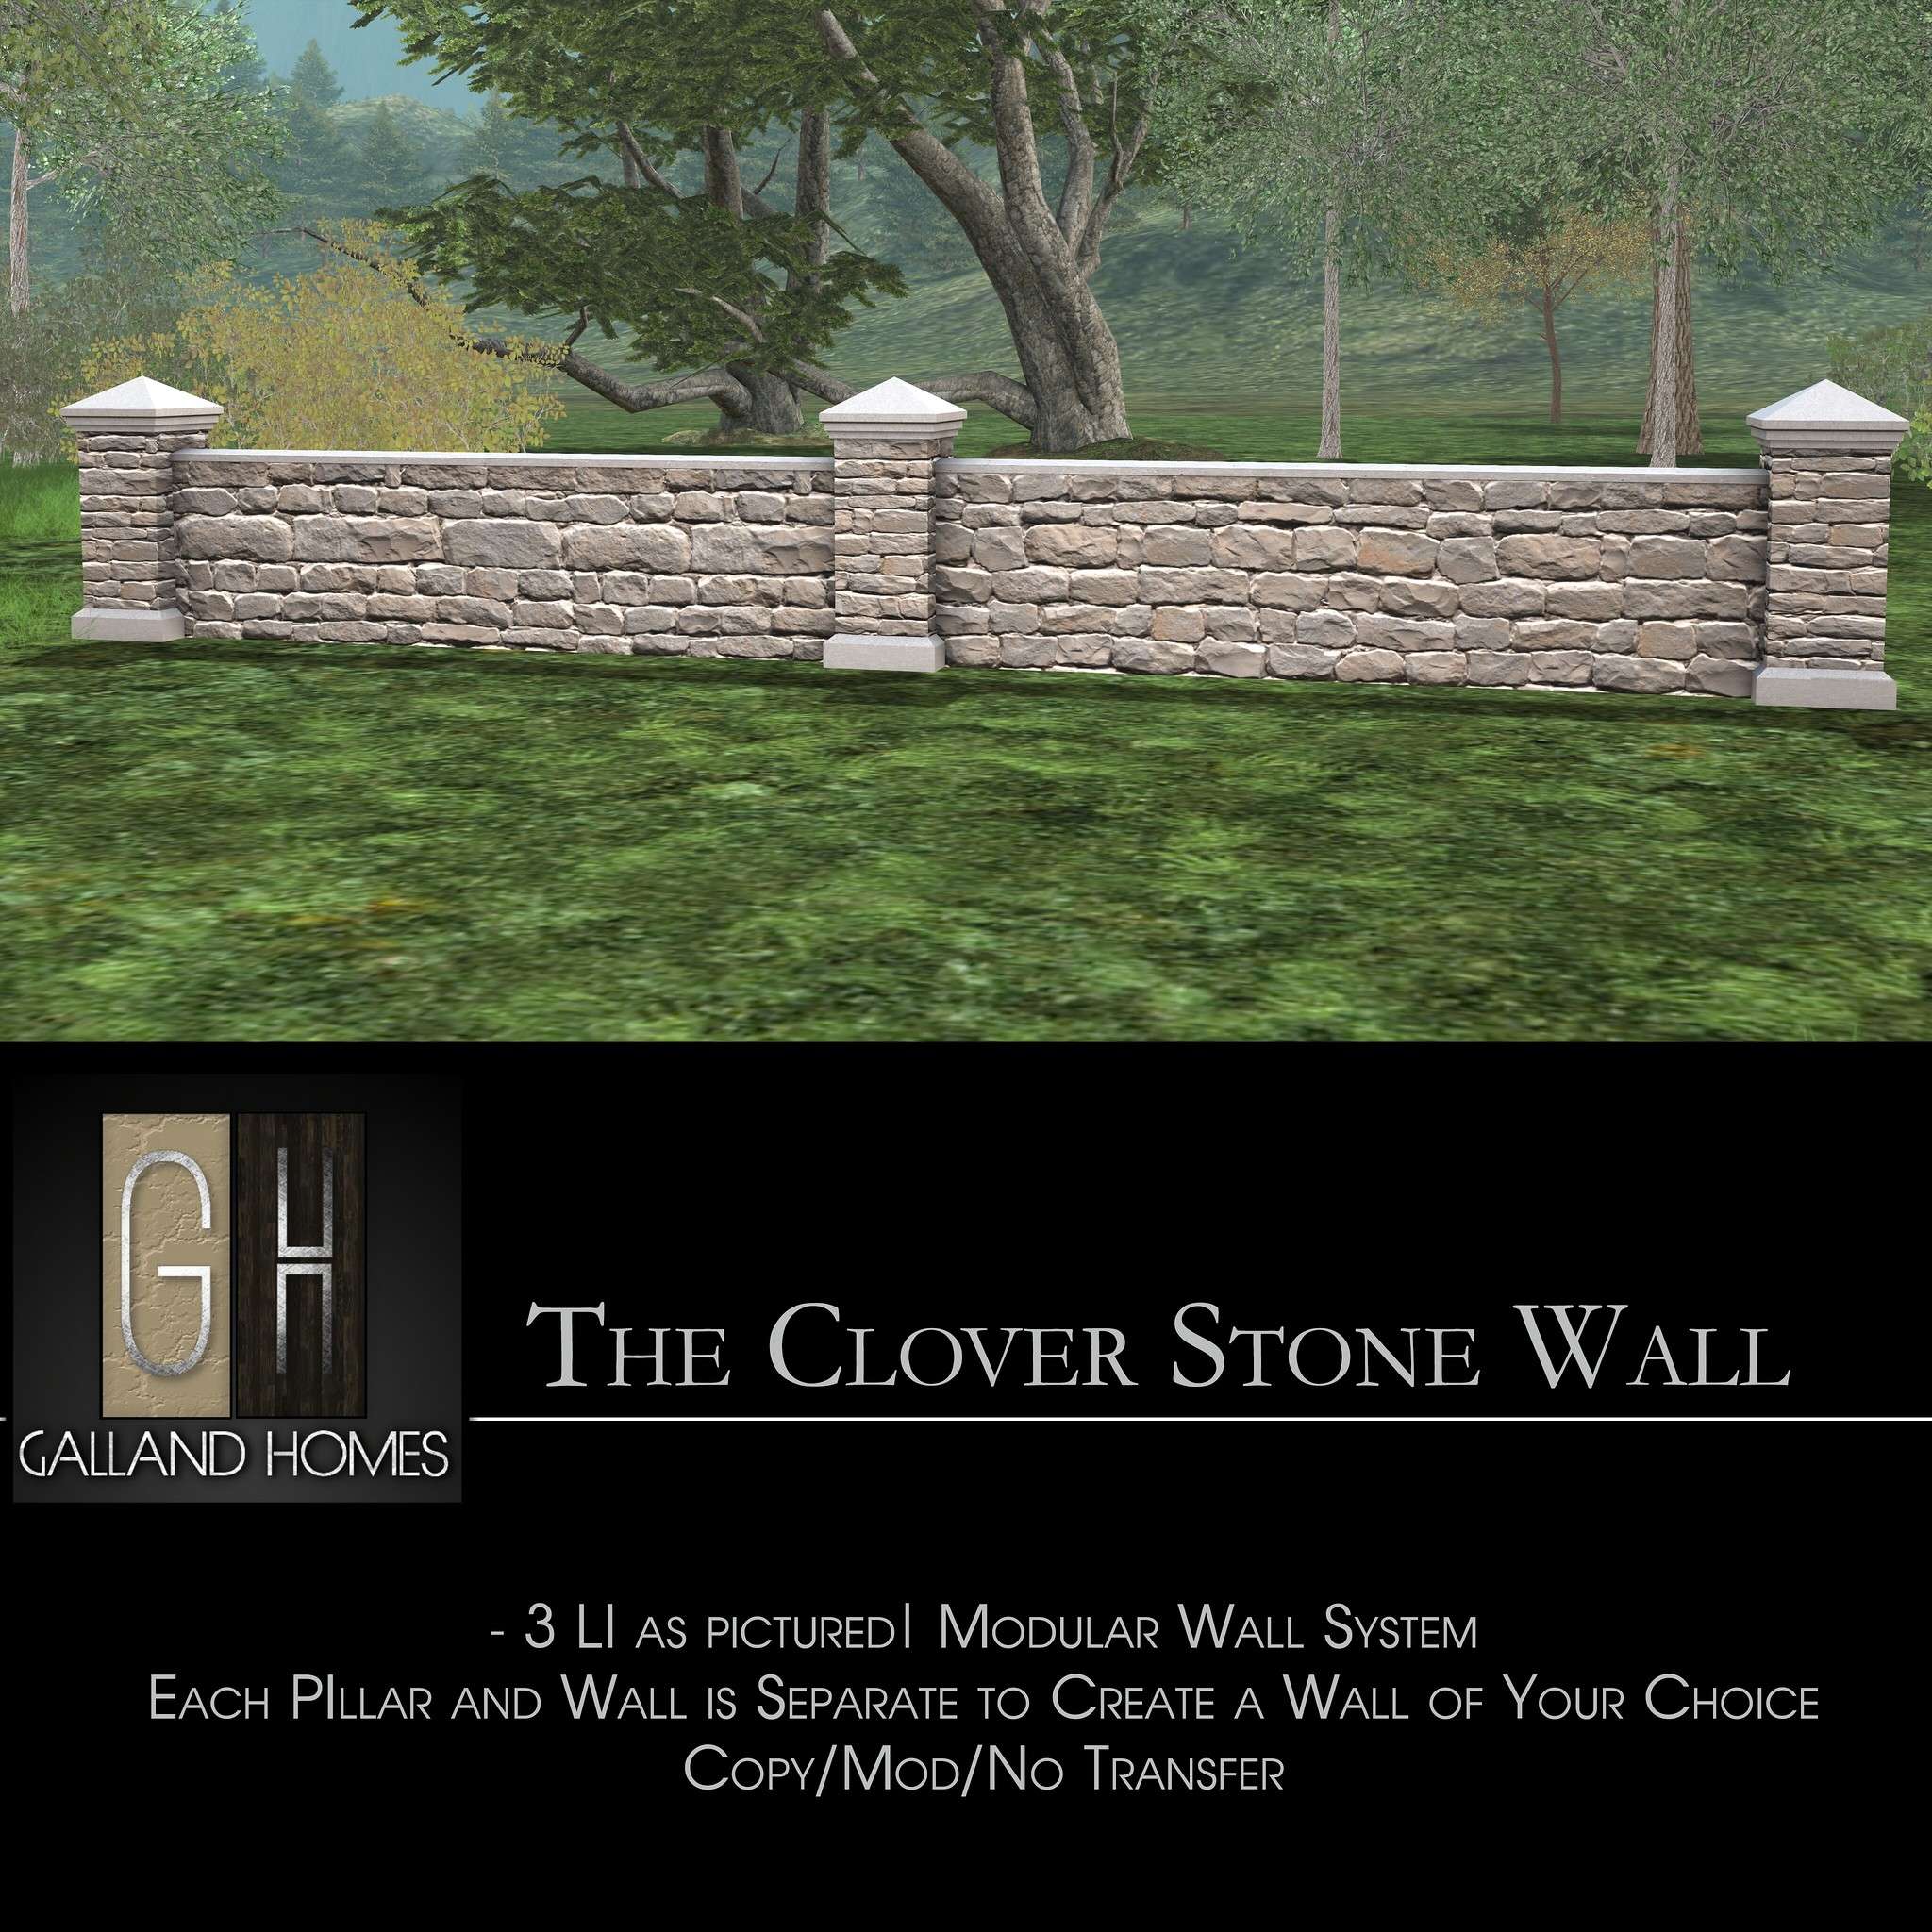 Galland Homes – Clover Stone Wall